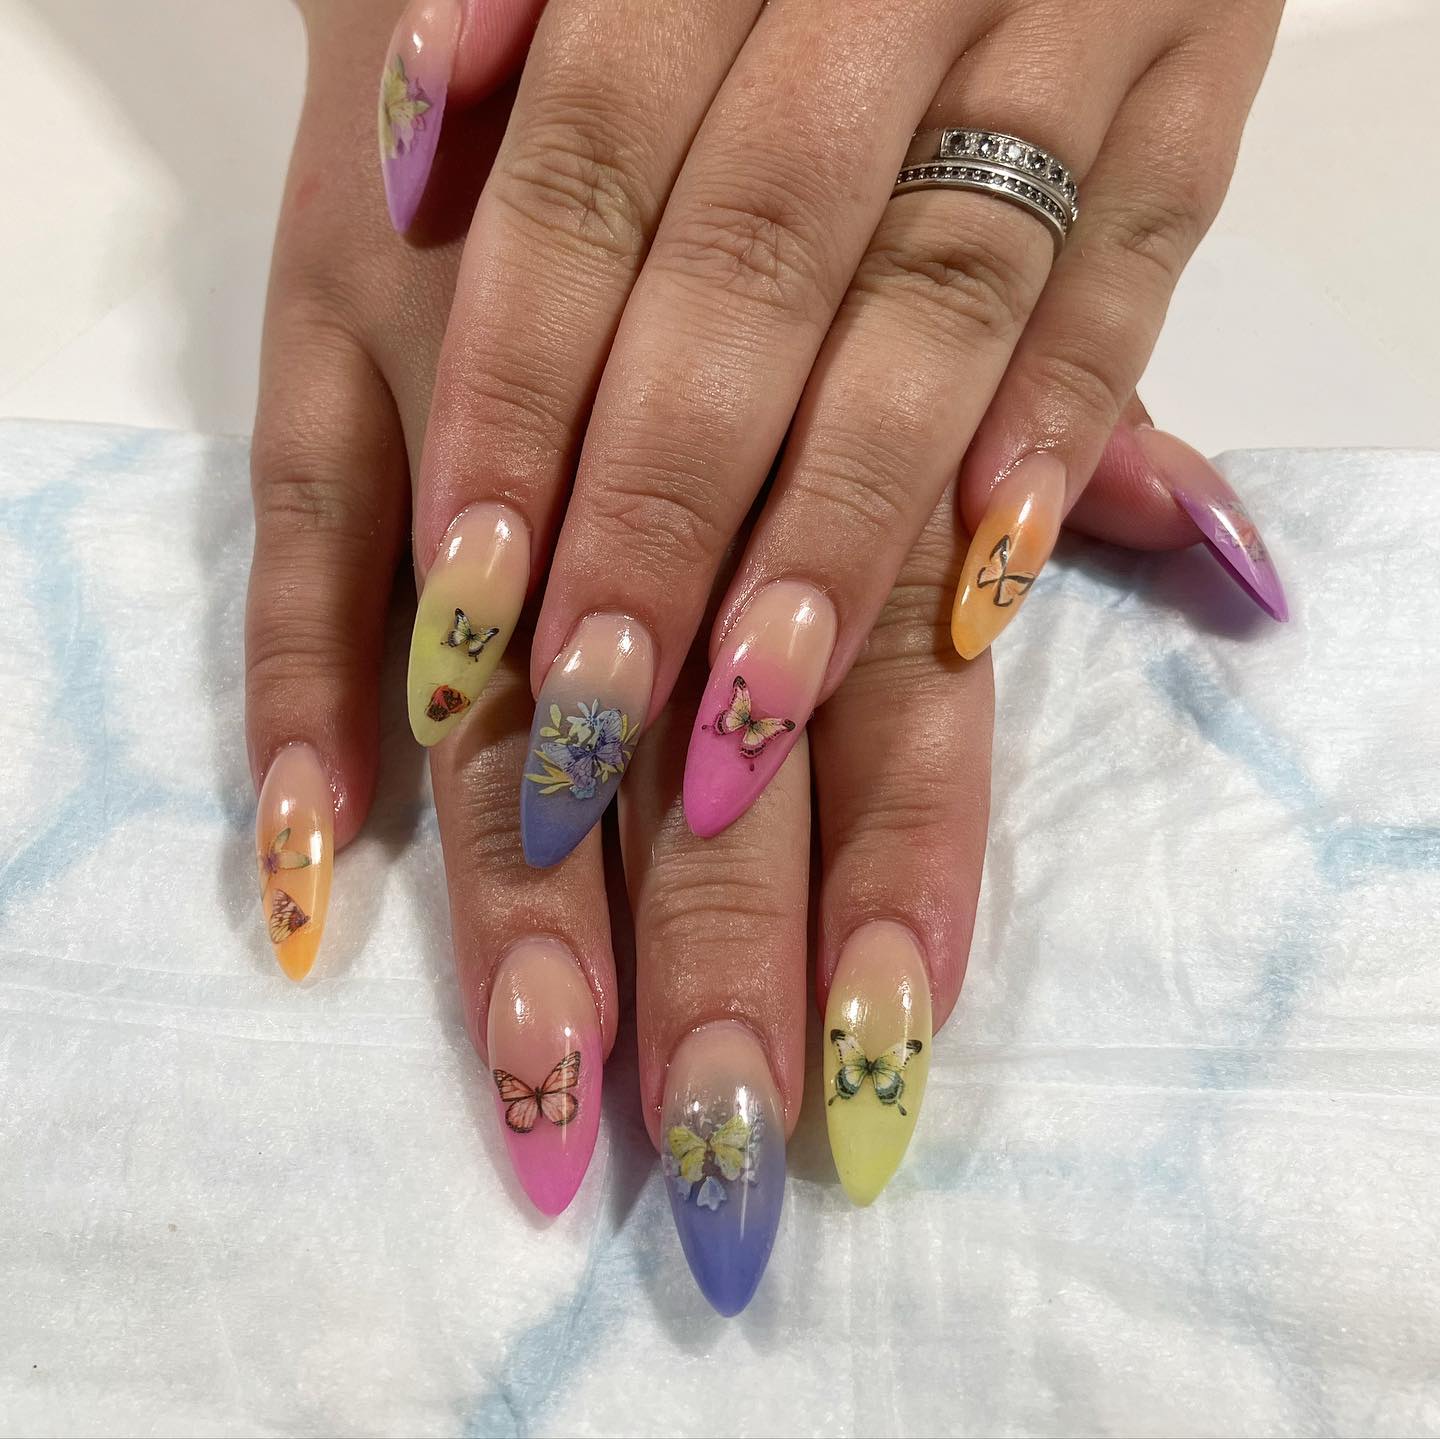 On top of your beautiful ombre nails, why not adding colorful butterfly stickers? These stickers go with colorful nails.